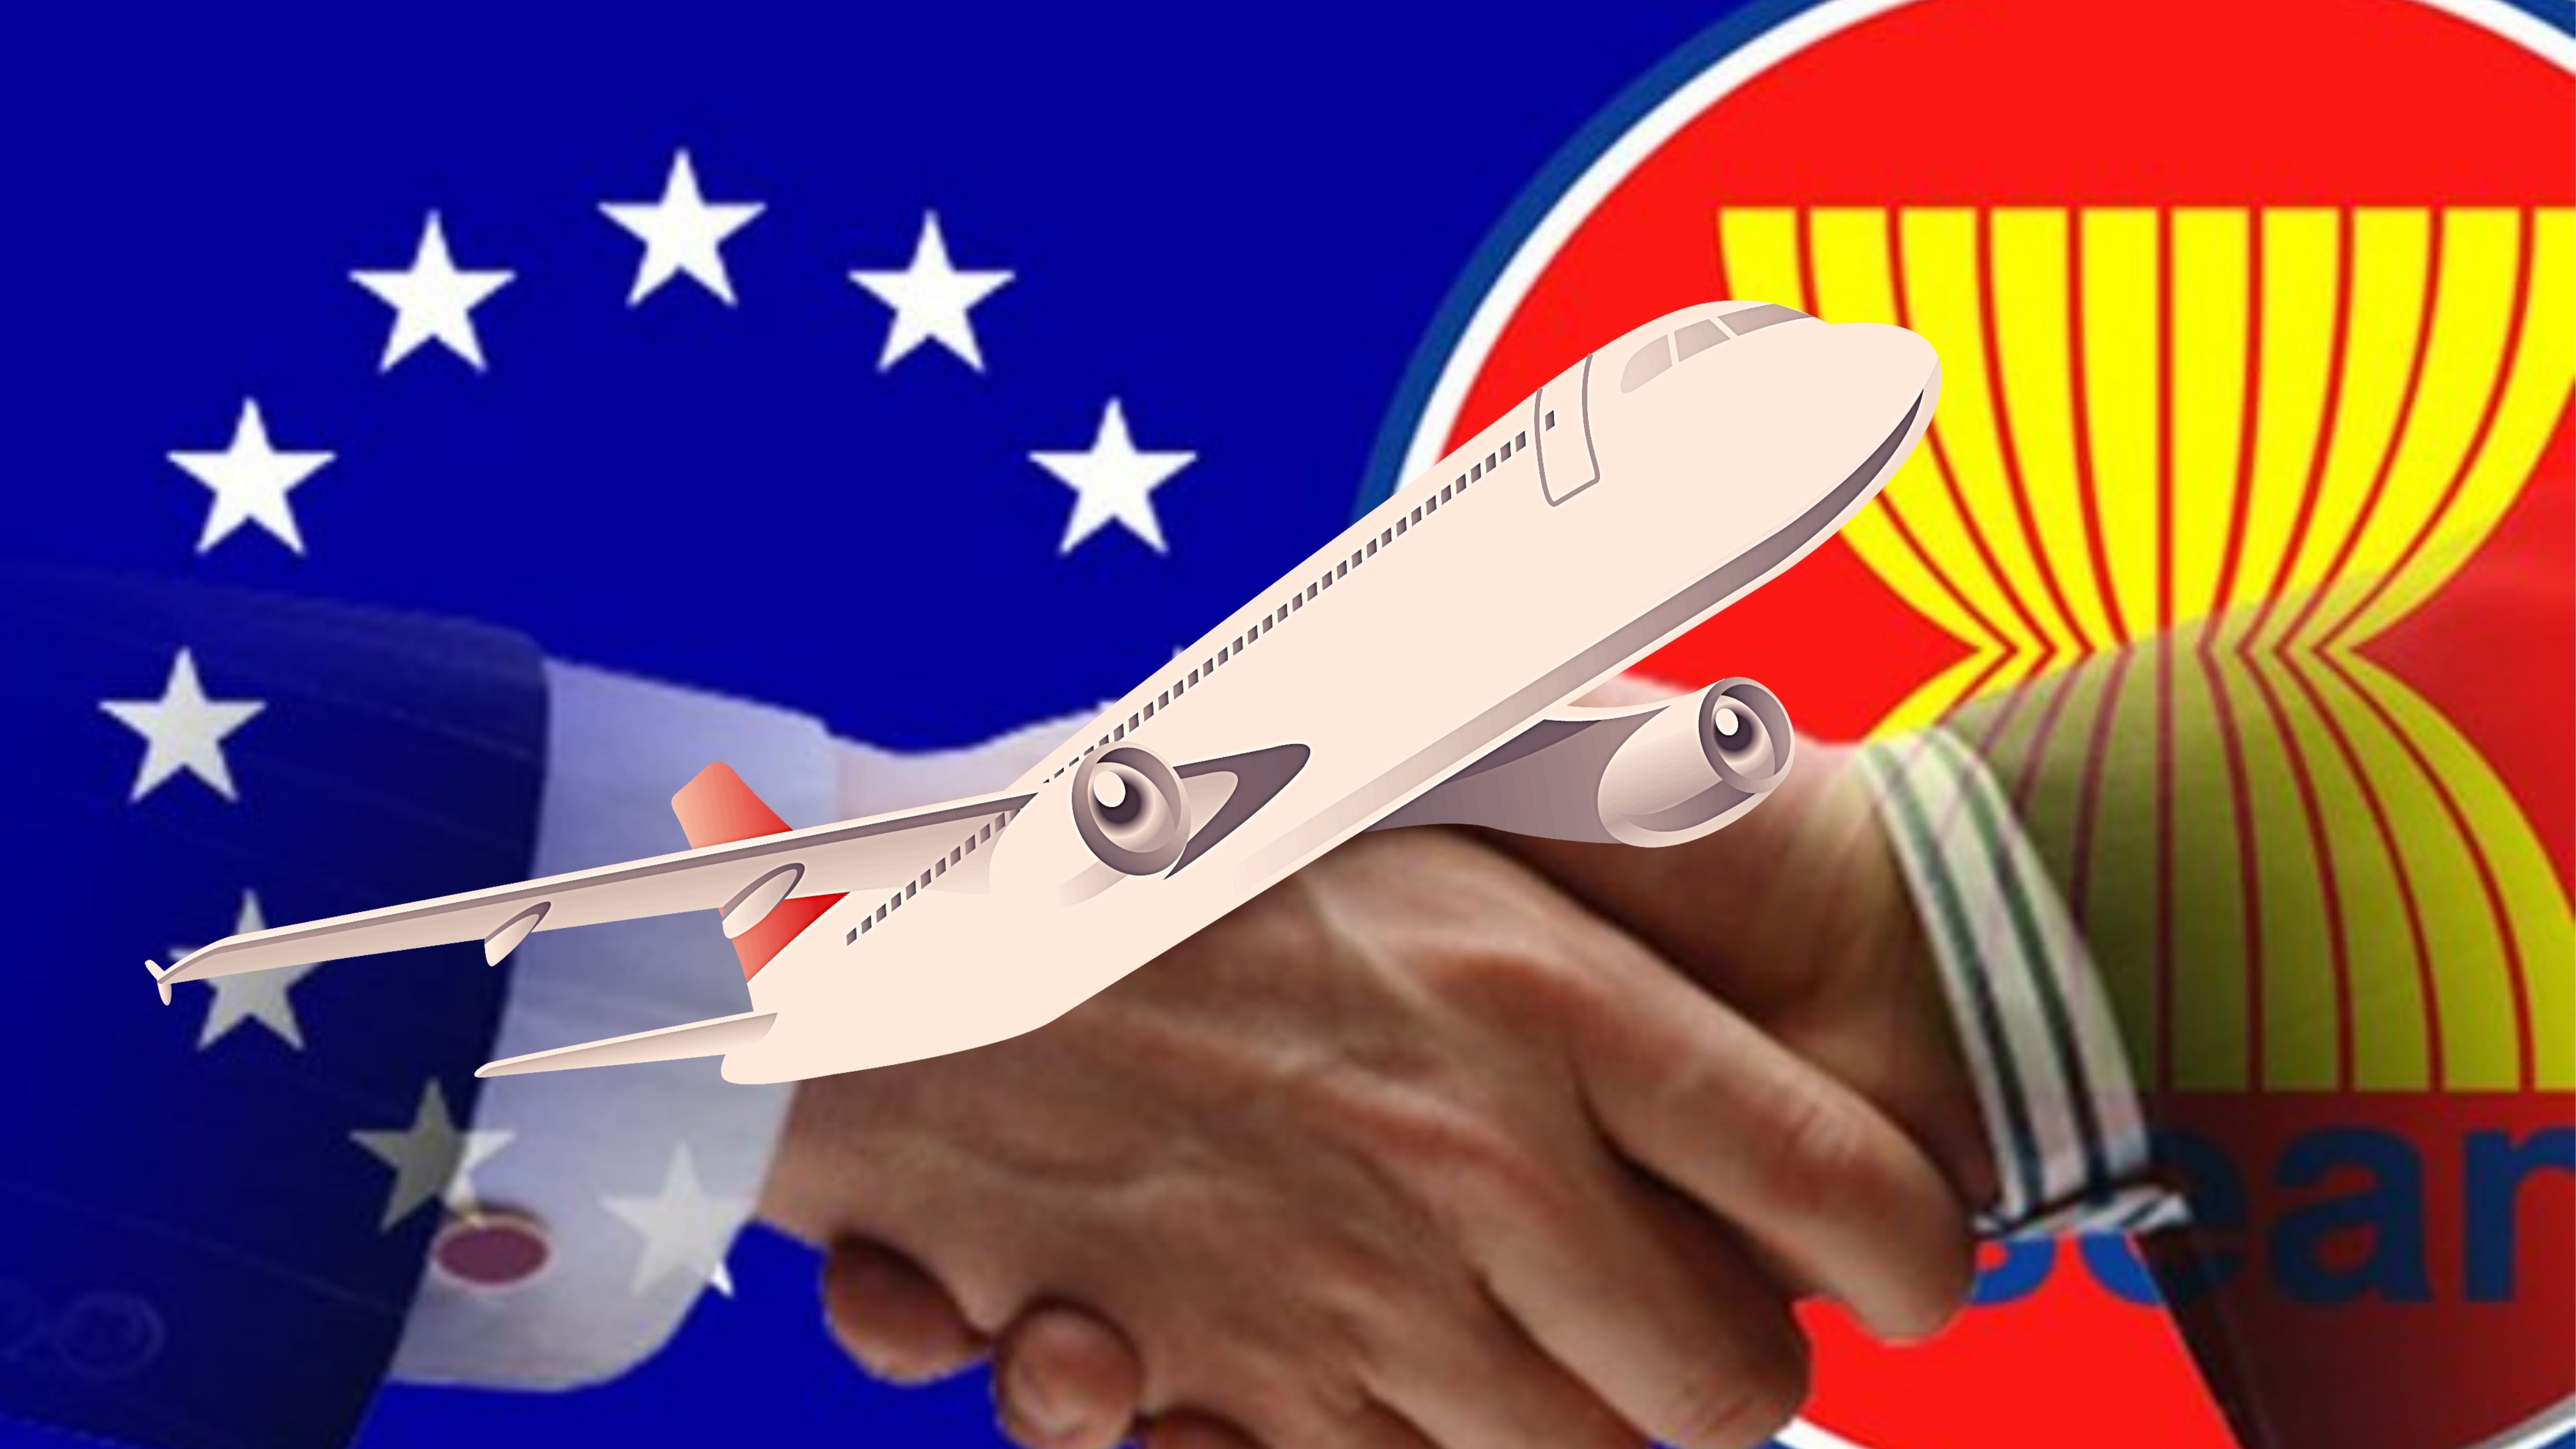 Agreement -  European Union  and  Asean  ink  landmark  aviation agreement  to  bolster  air  connectivity.